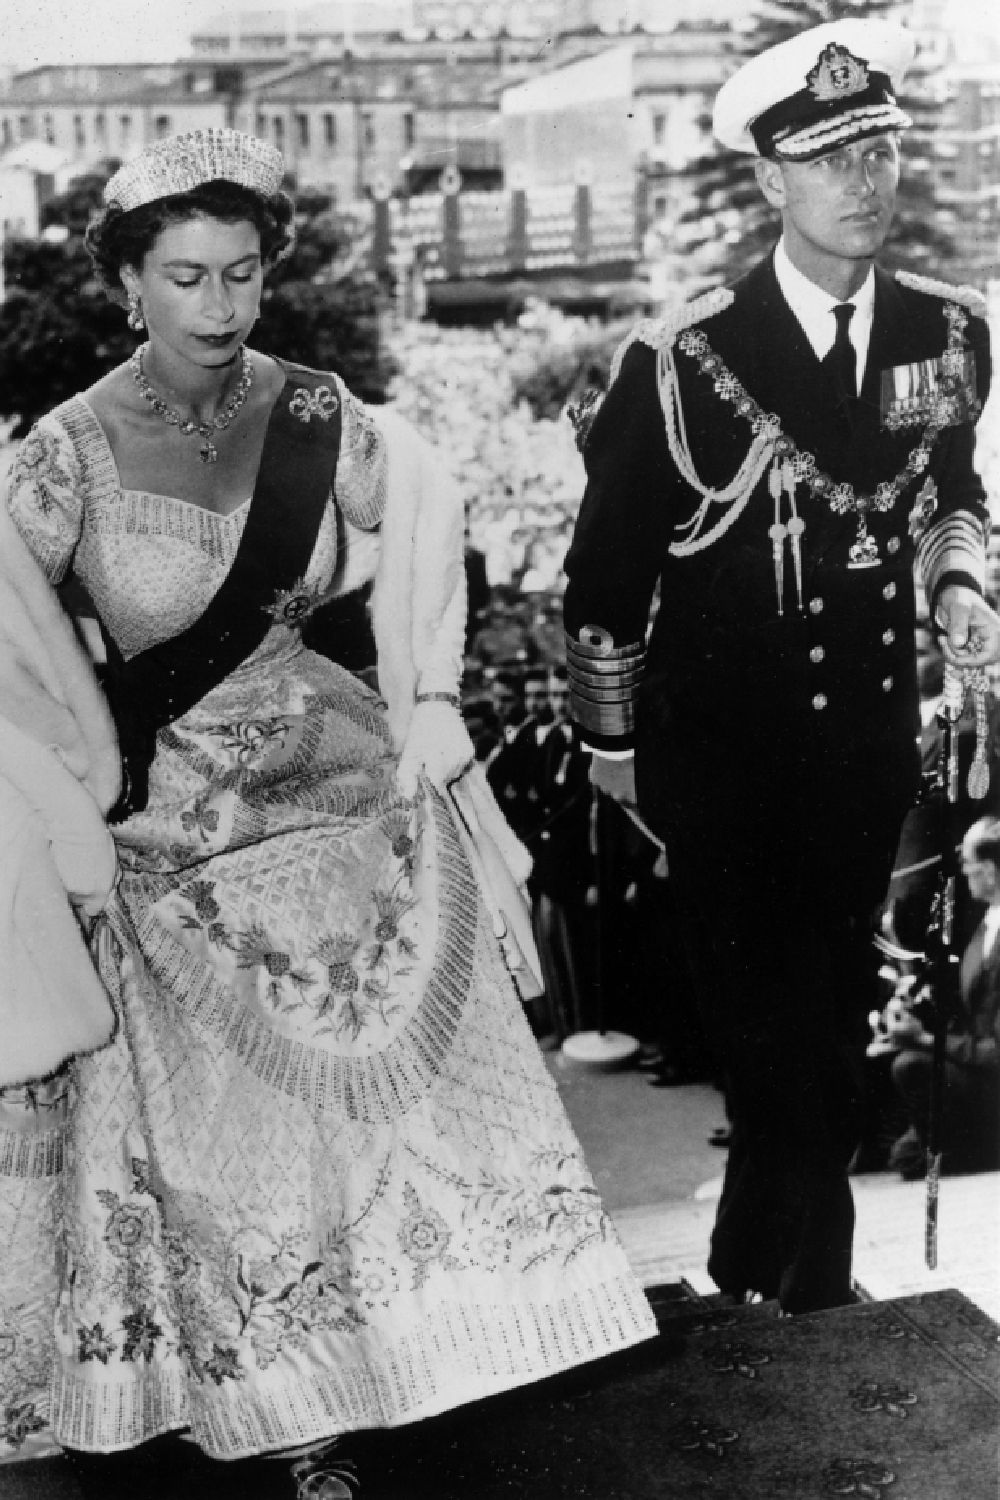 <p>                     The royals have been known to recycle their outfits - and the late Queen was no exception. Since the Coronation, the Queen reportedly wore her coronation dress six times including during the Opening of Parliament in New Zealand and Australia in 1954, as pictured here.                    </p>